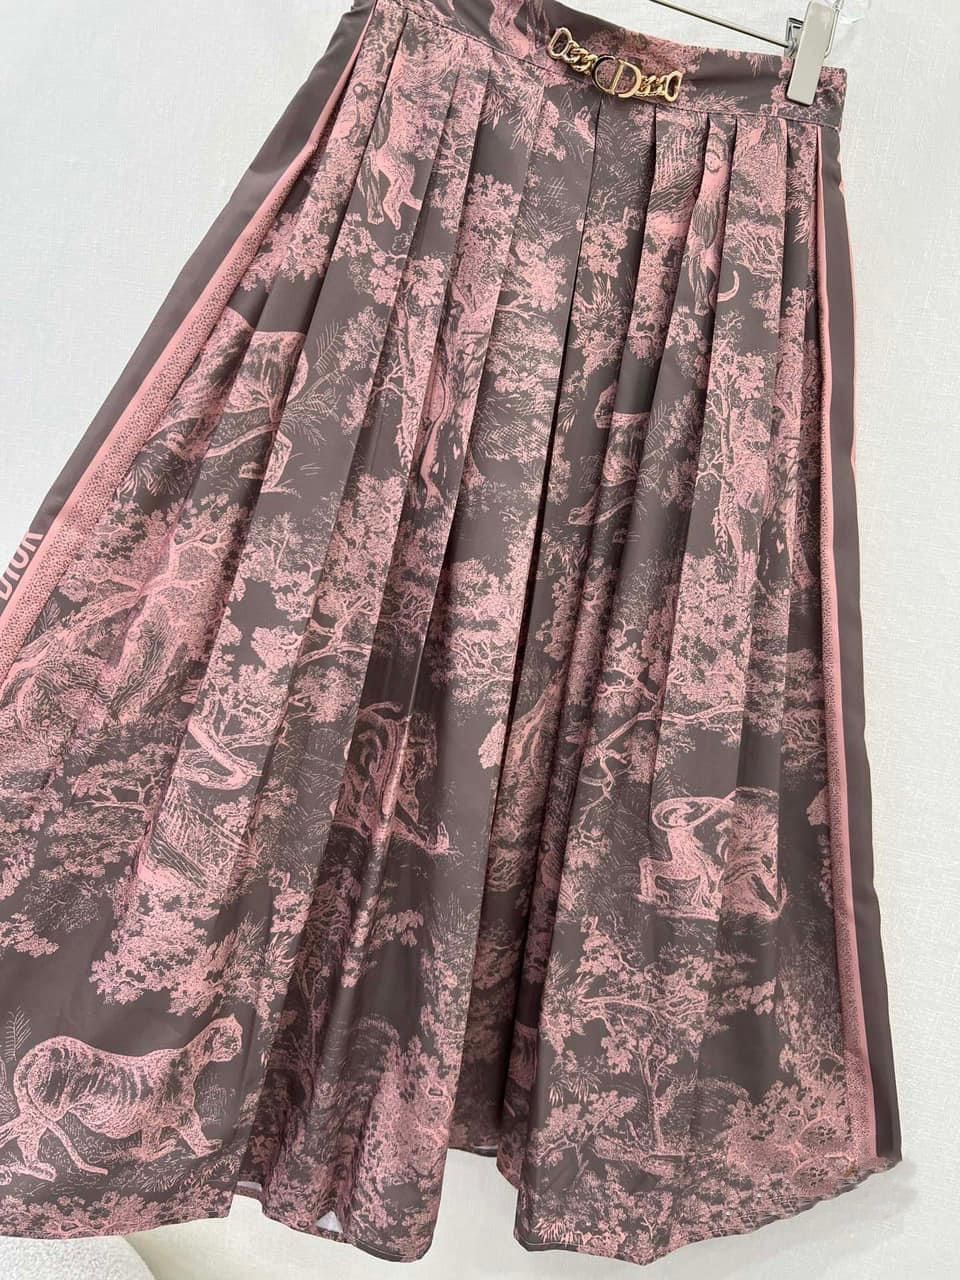 VÁY DIORIVIERA FLARED SKIRT GRAY AND PINK COTTON MUSLIN WITH TOILE DE JOUY REVERSE MOTIF 4